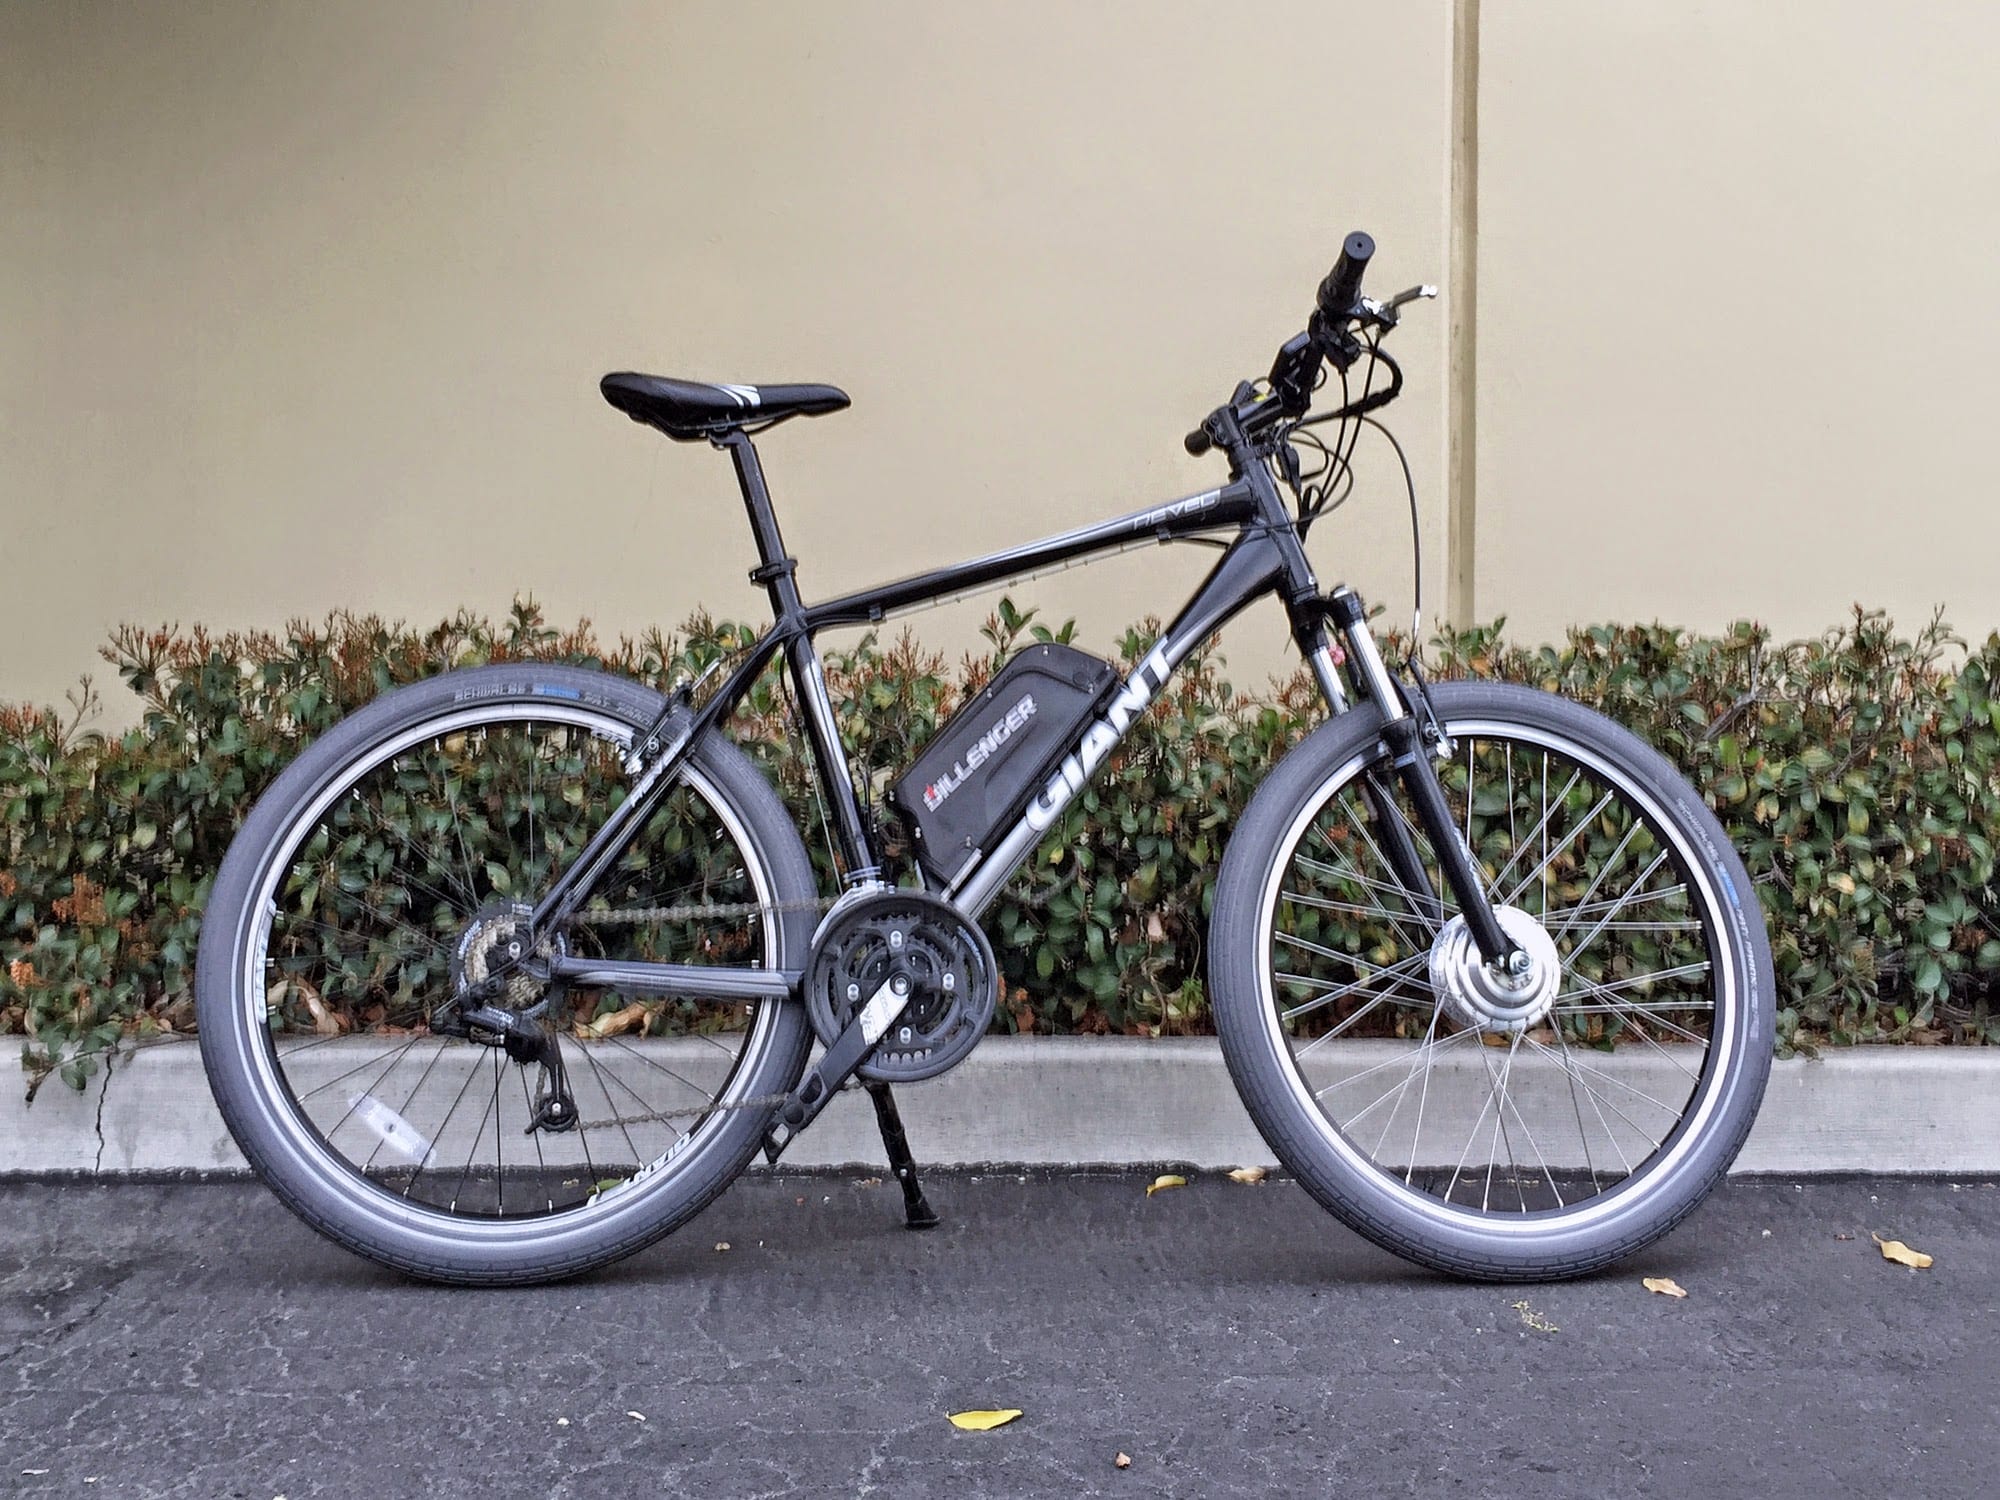 Dillenger 350w Geared Electric Bike Kit Review Electricbikereview Com